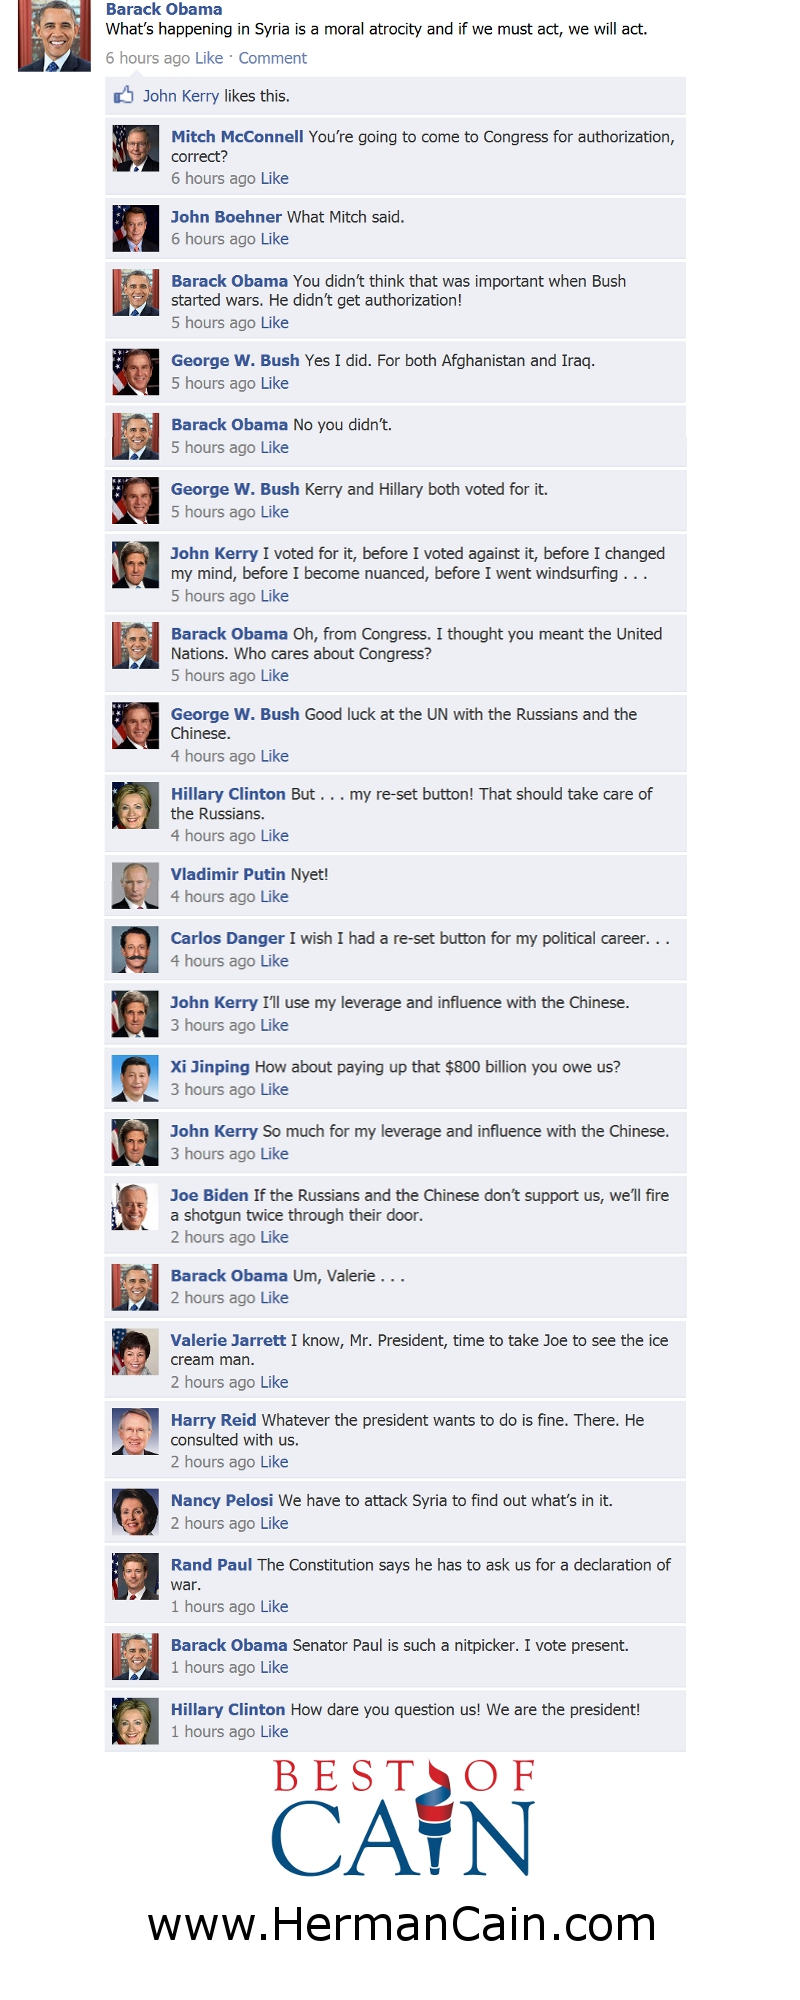 Cain - Facebook posts on Syria